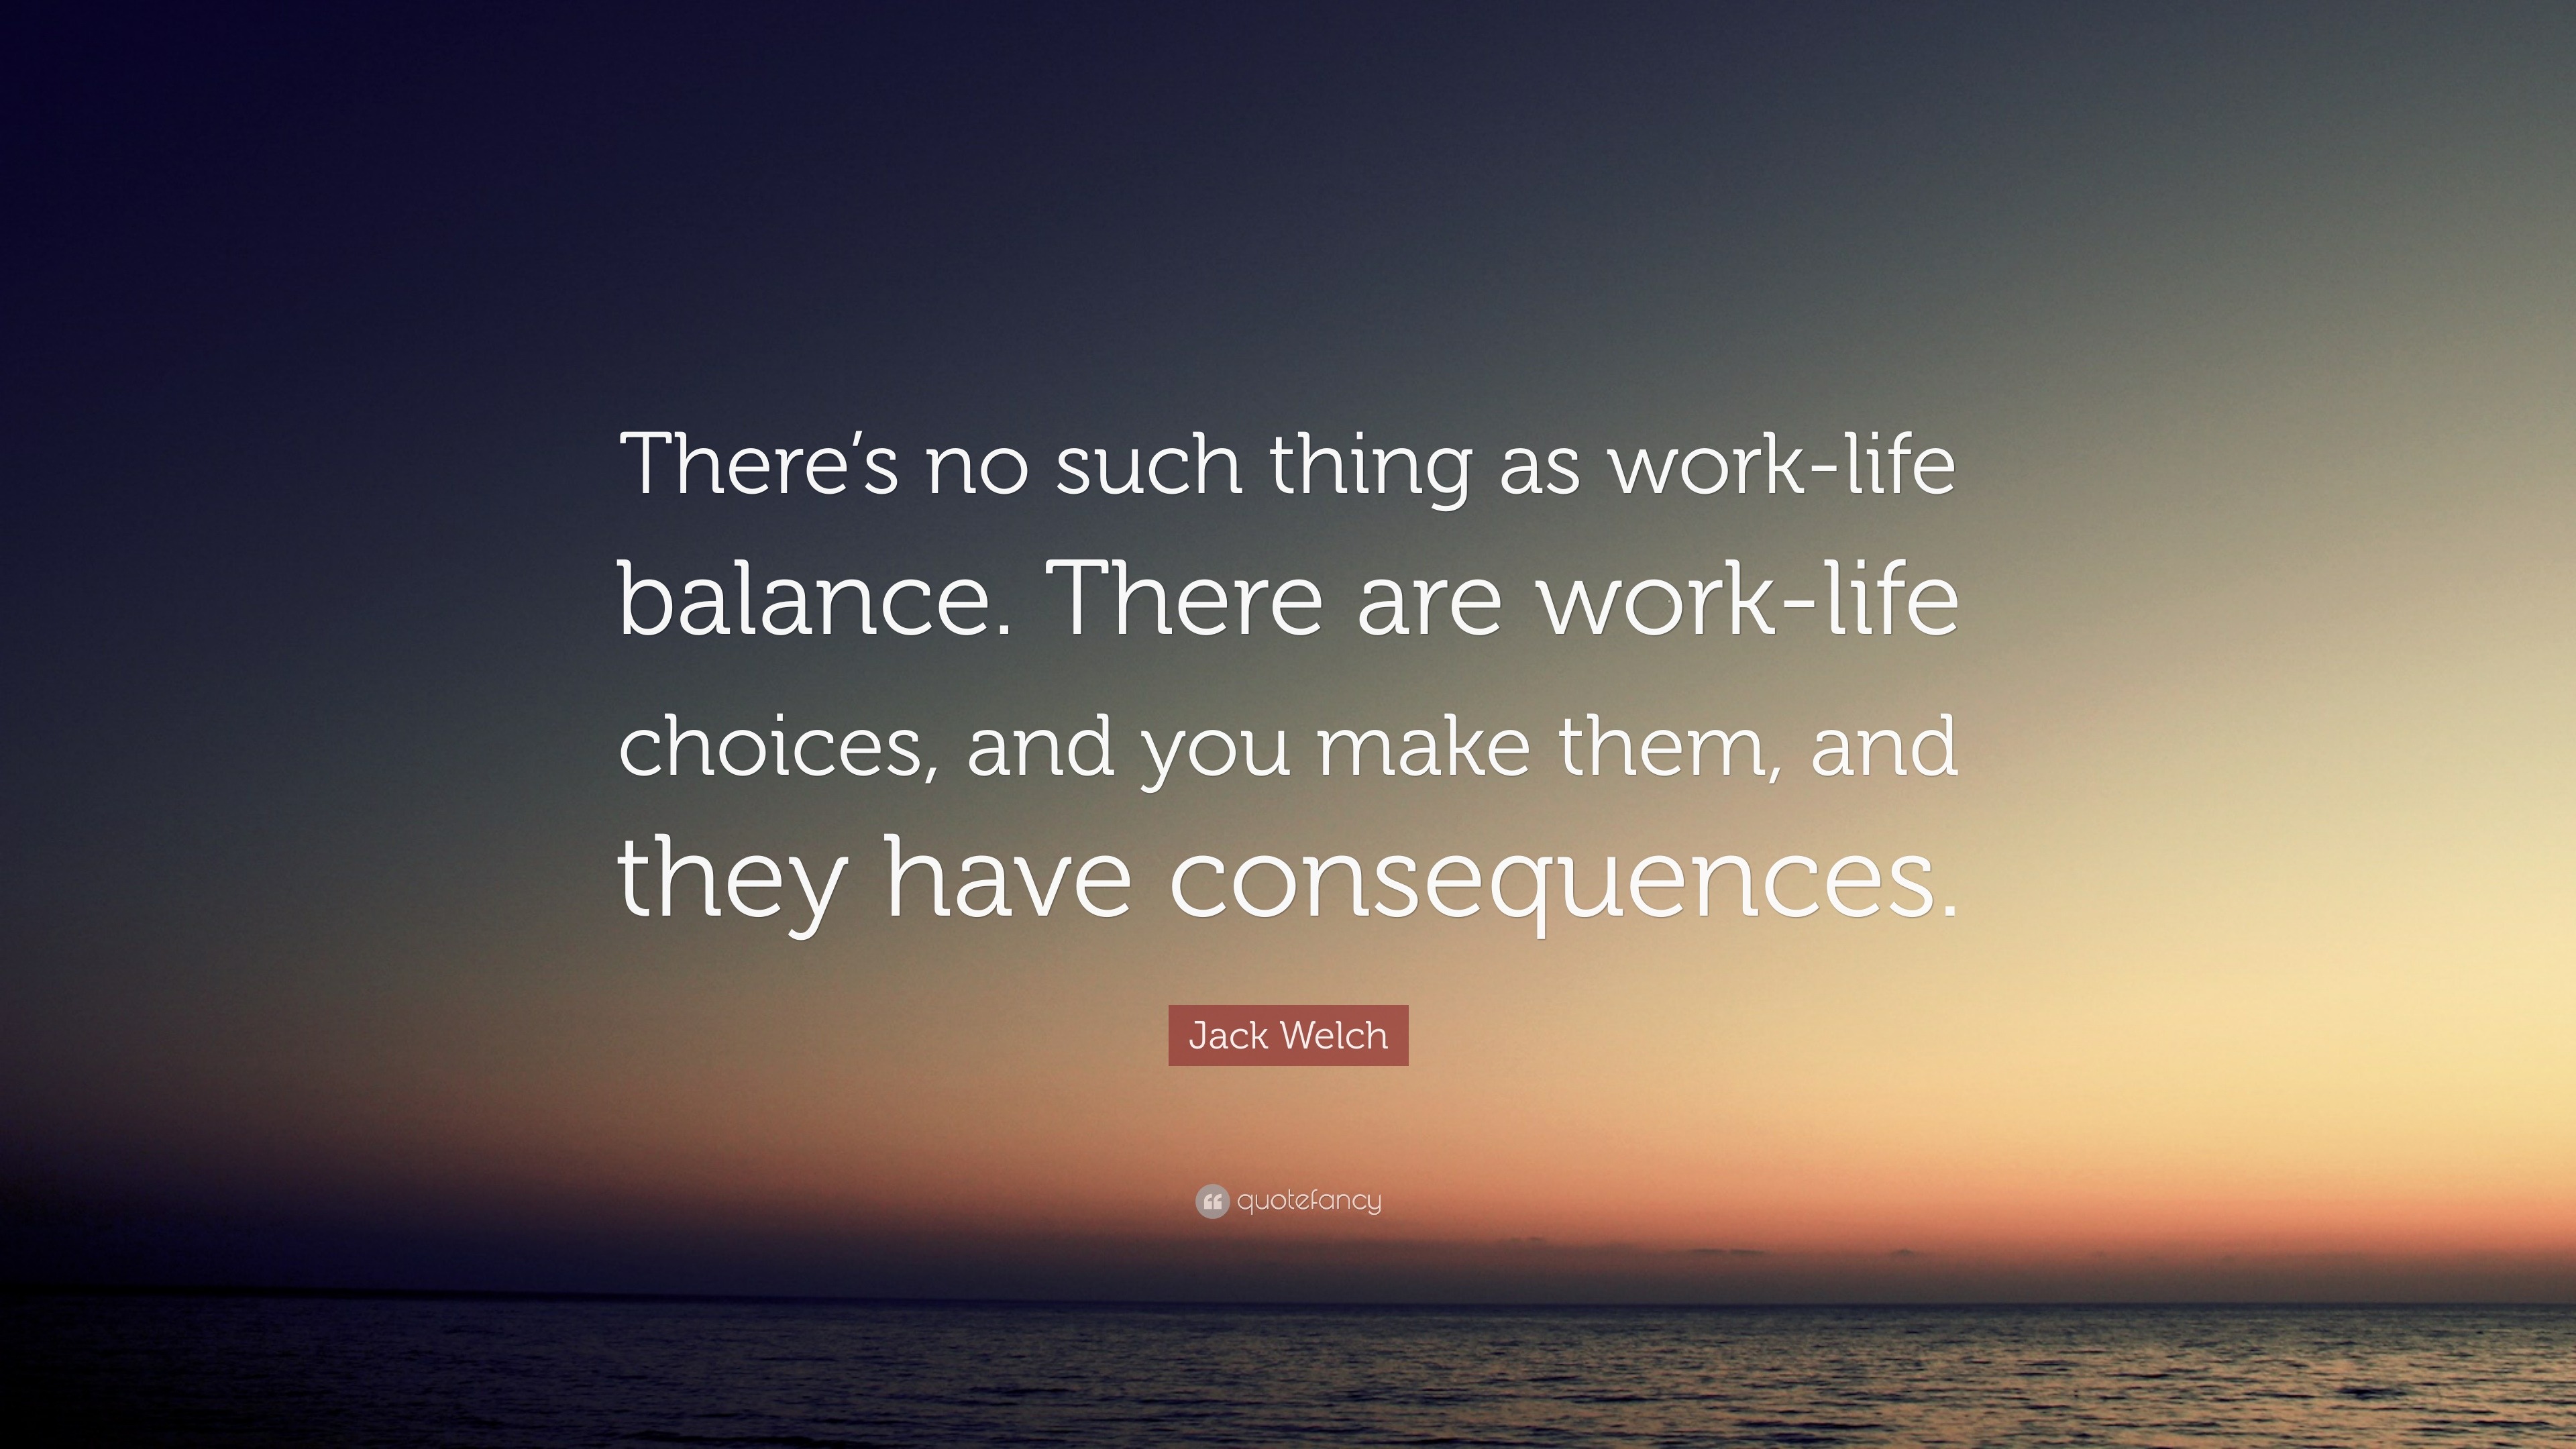 Jack Welch Quote: “There’s no such thing as work-life balance. There